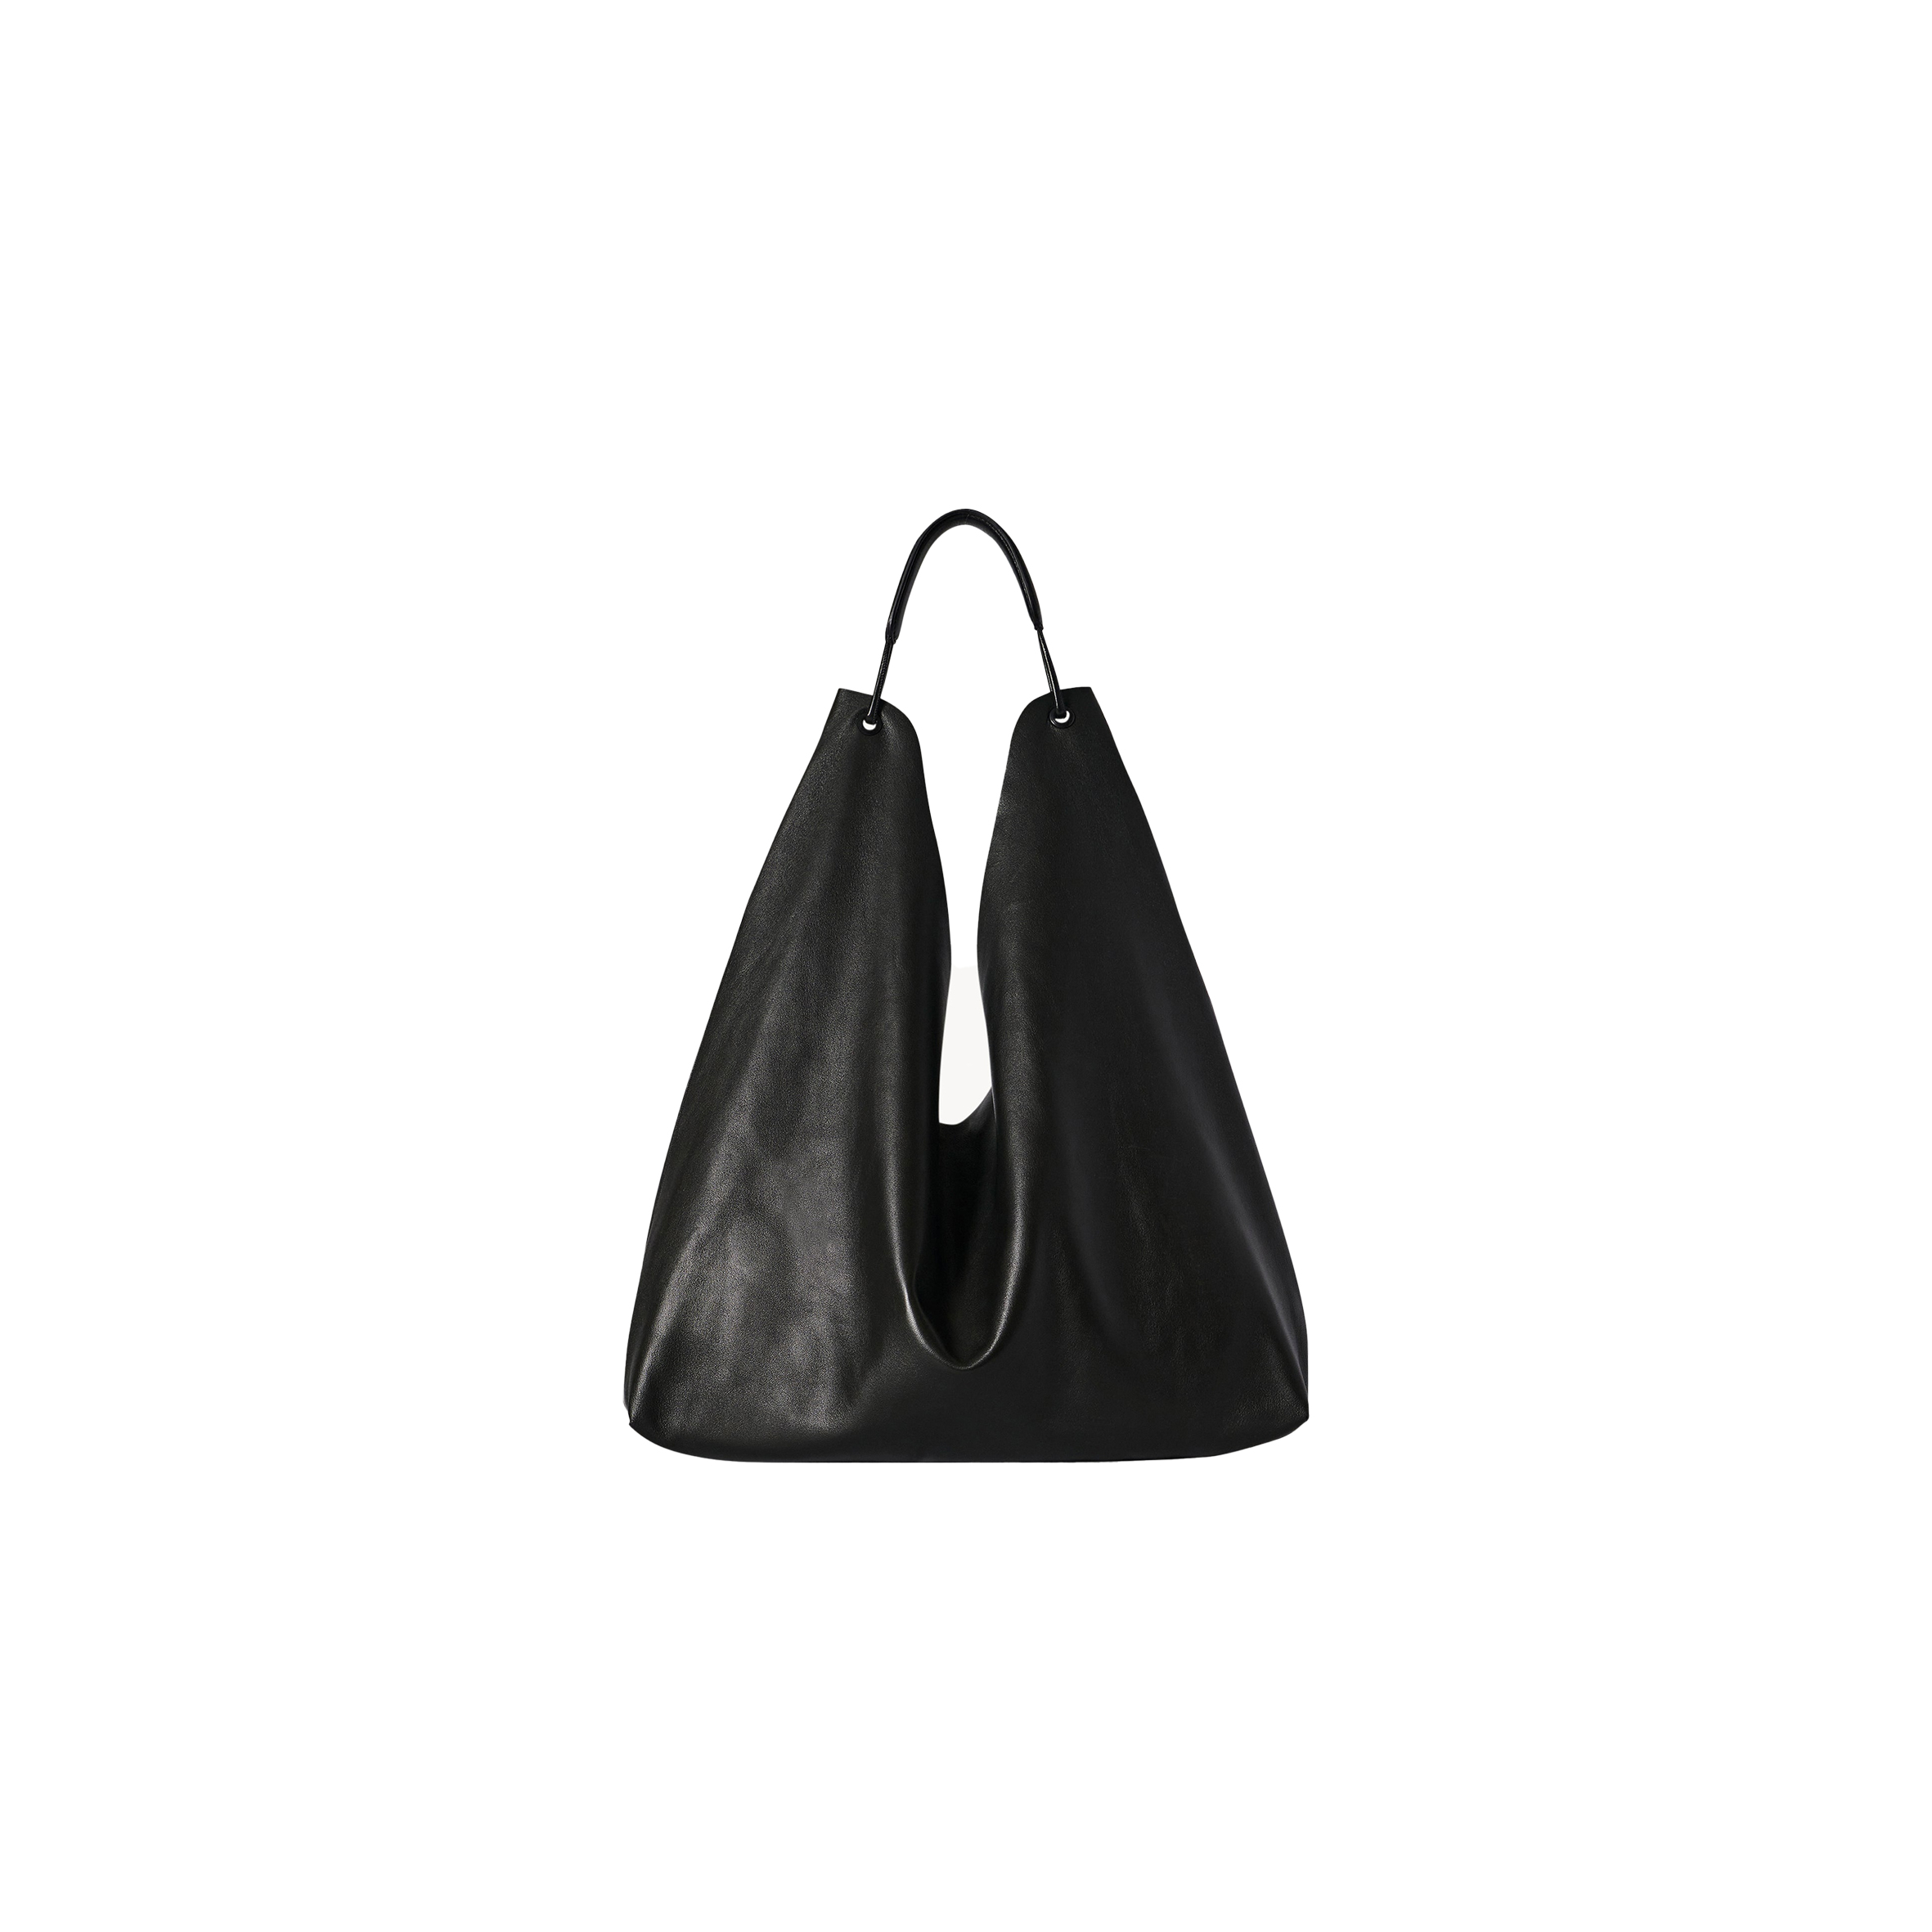 THE ROW BINDLE 3 BAG IN LEATHER BLACK W1623L108BLKBL (28*31*14cm)